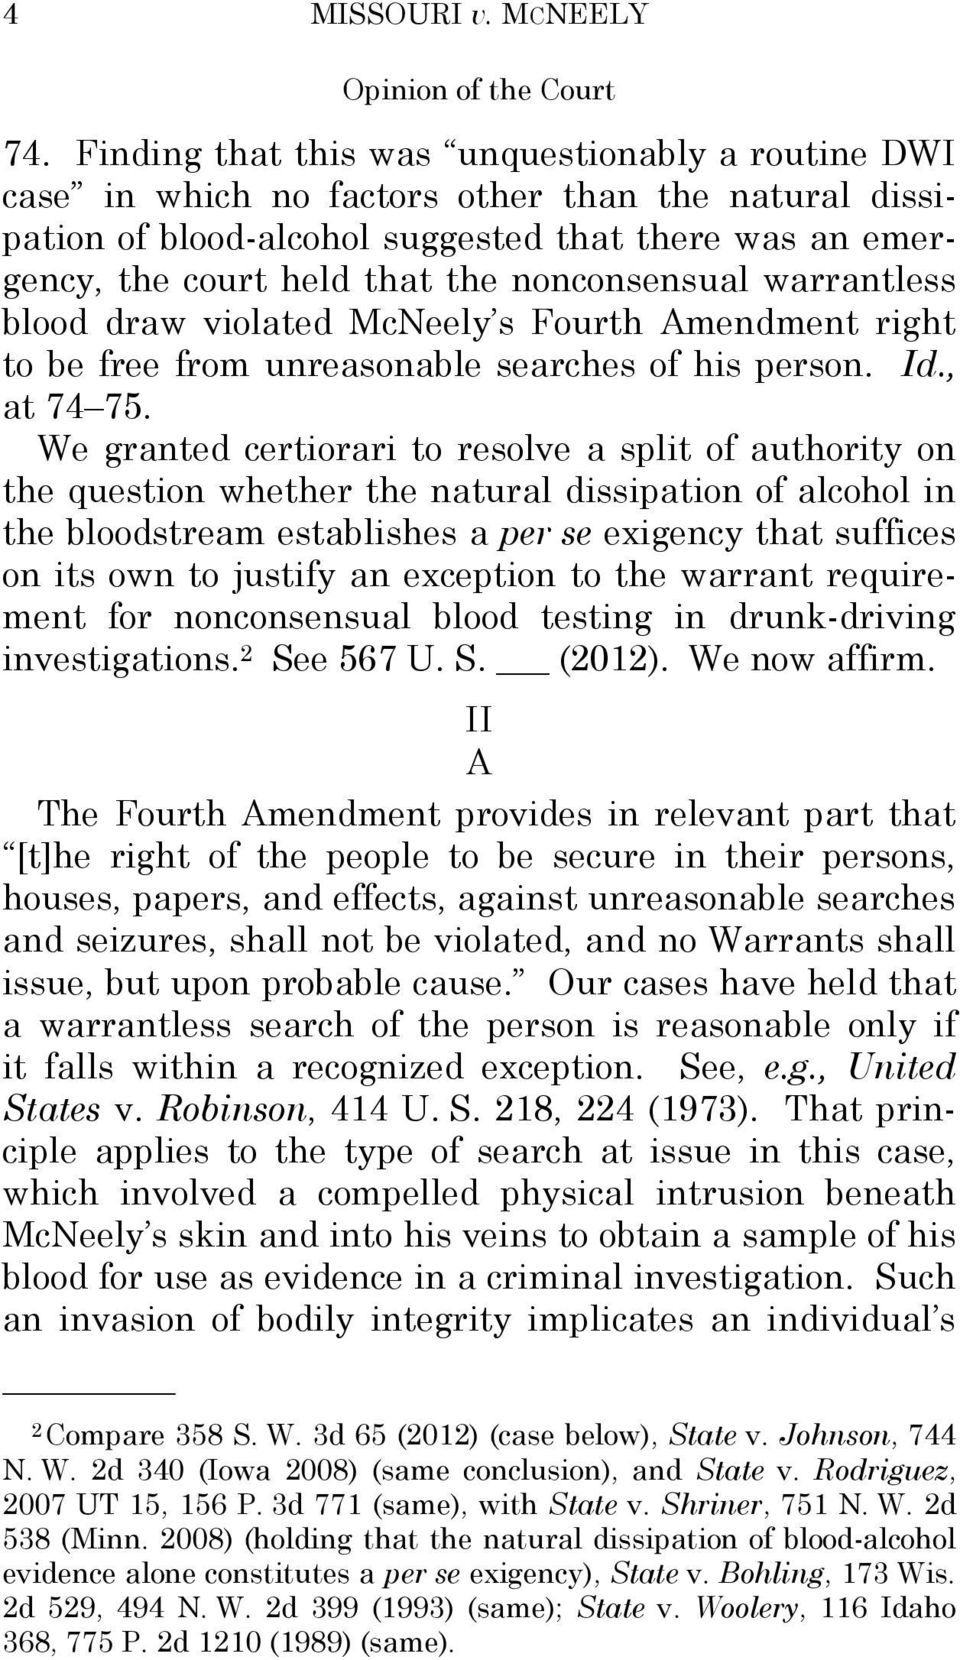 nonconsensual warrantless blood draw violated McNeely s Fourth Amendment right to be free from unreasonable searches of his person. Id., at 74 75.